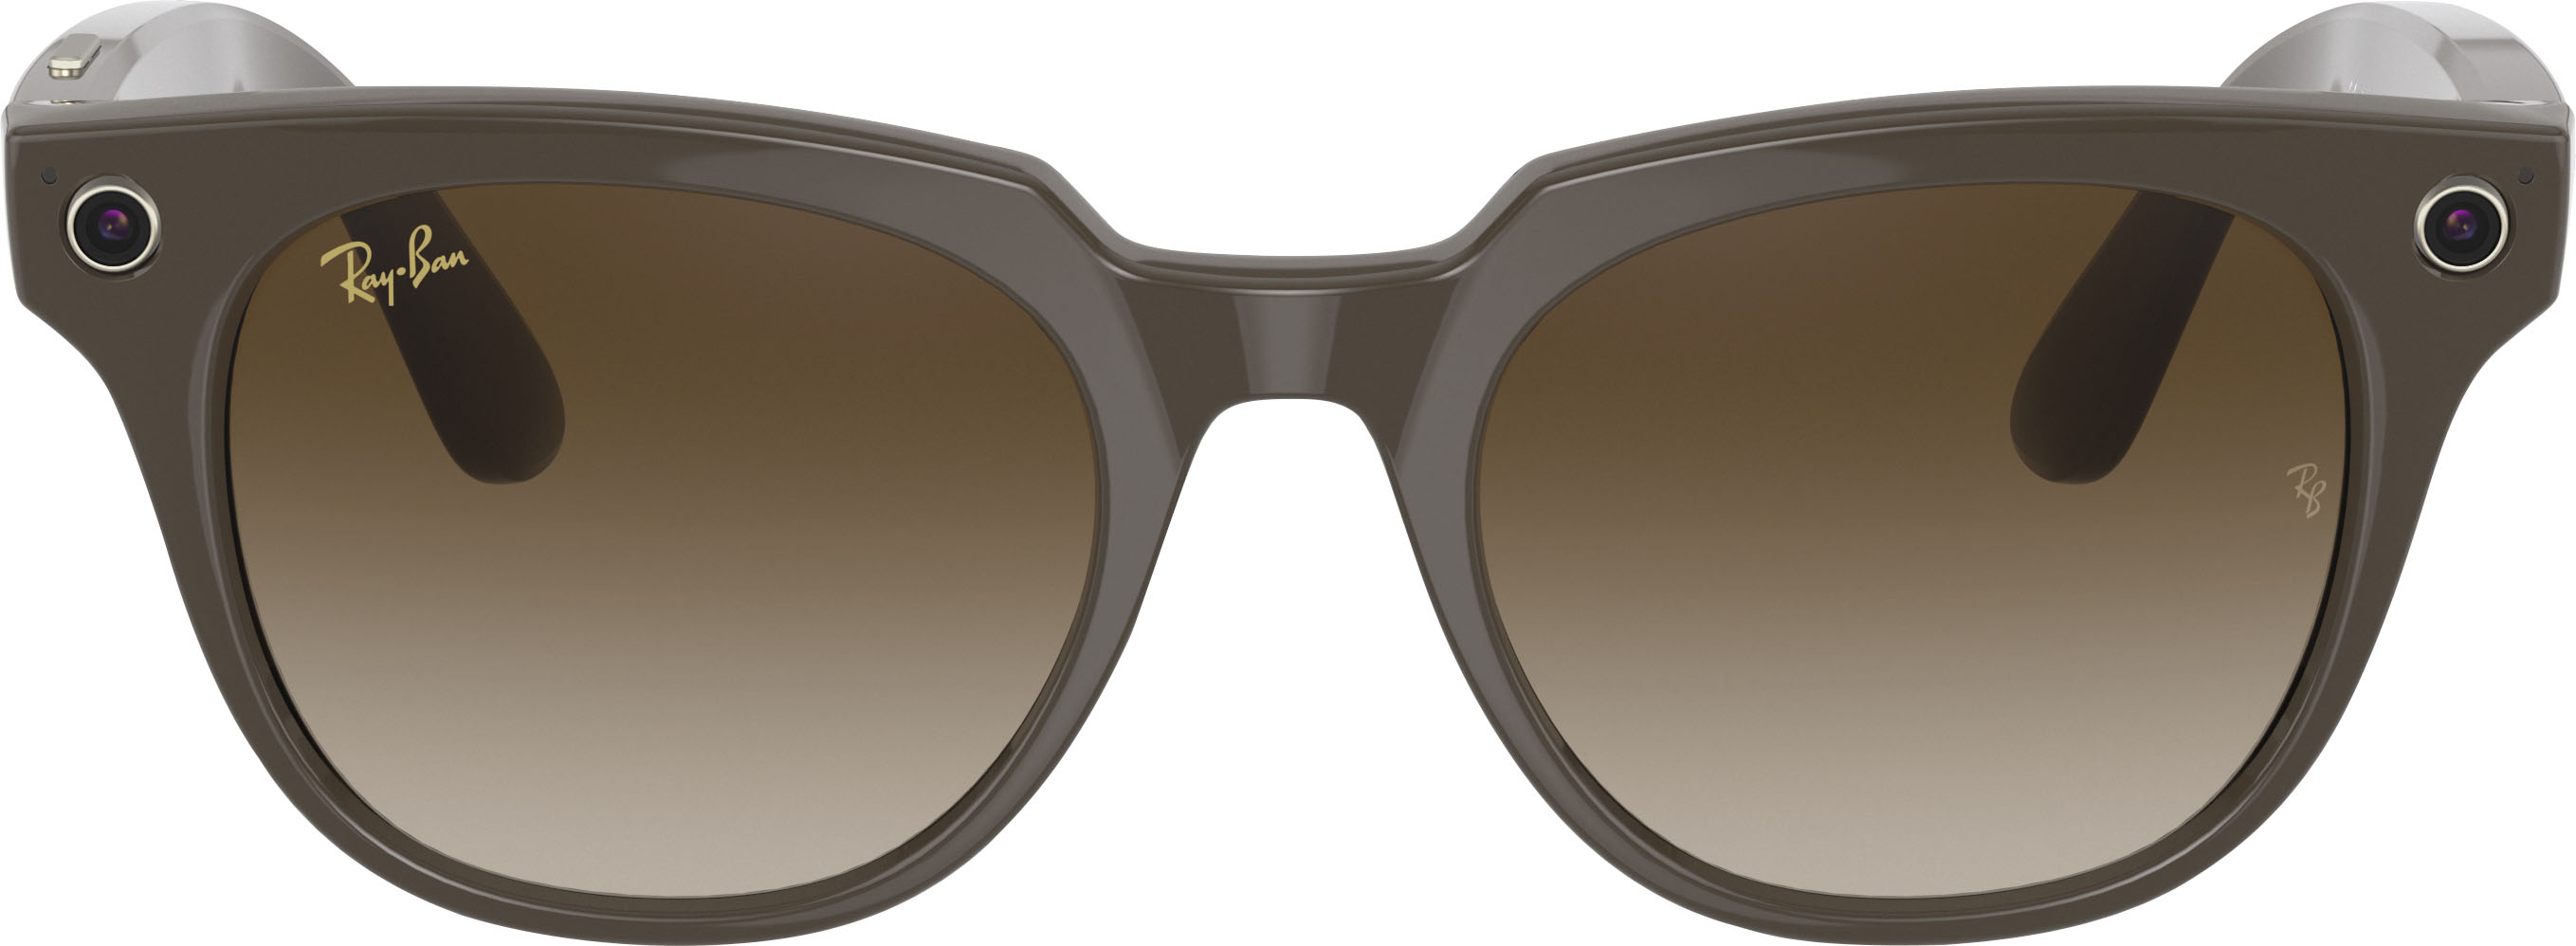 Zoom in on Angle Zoom. Ray-Ban - Stories Meteor Smart Glasses - Shiny Brown/Brown Gradient.